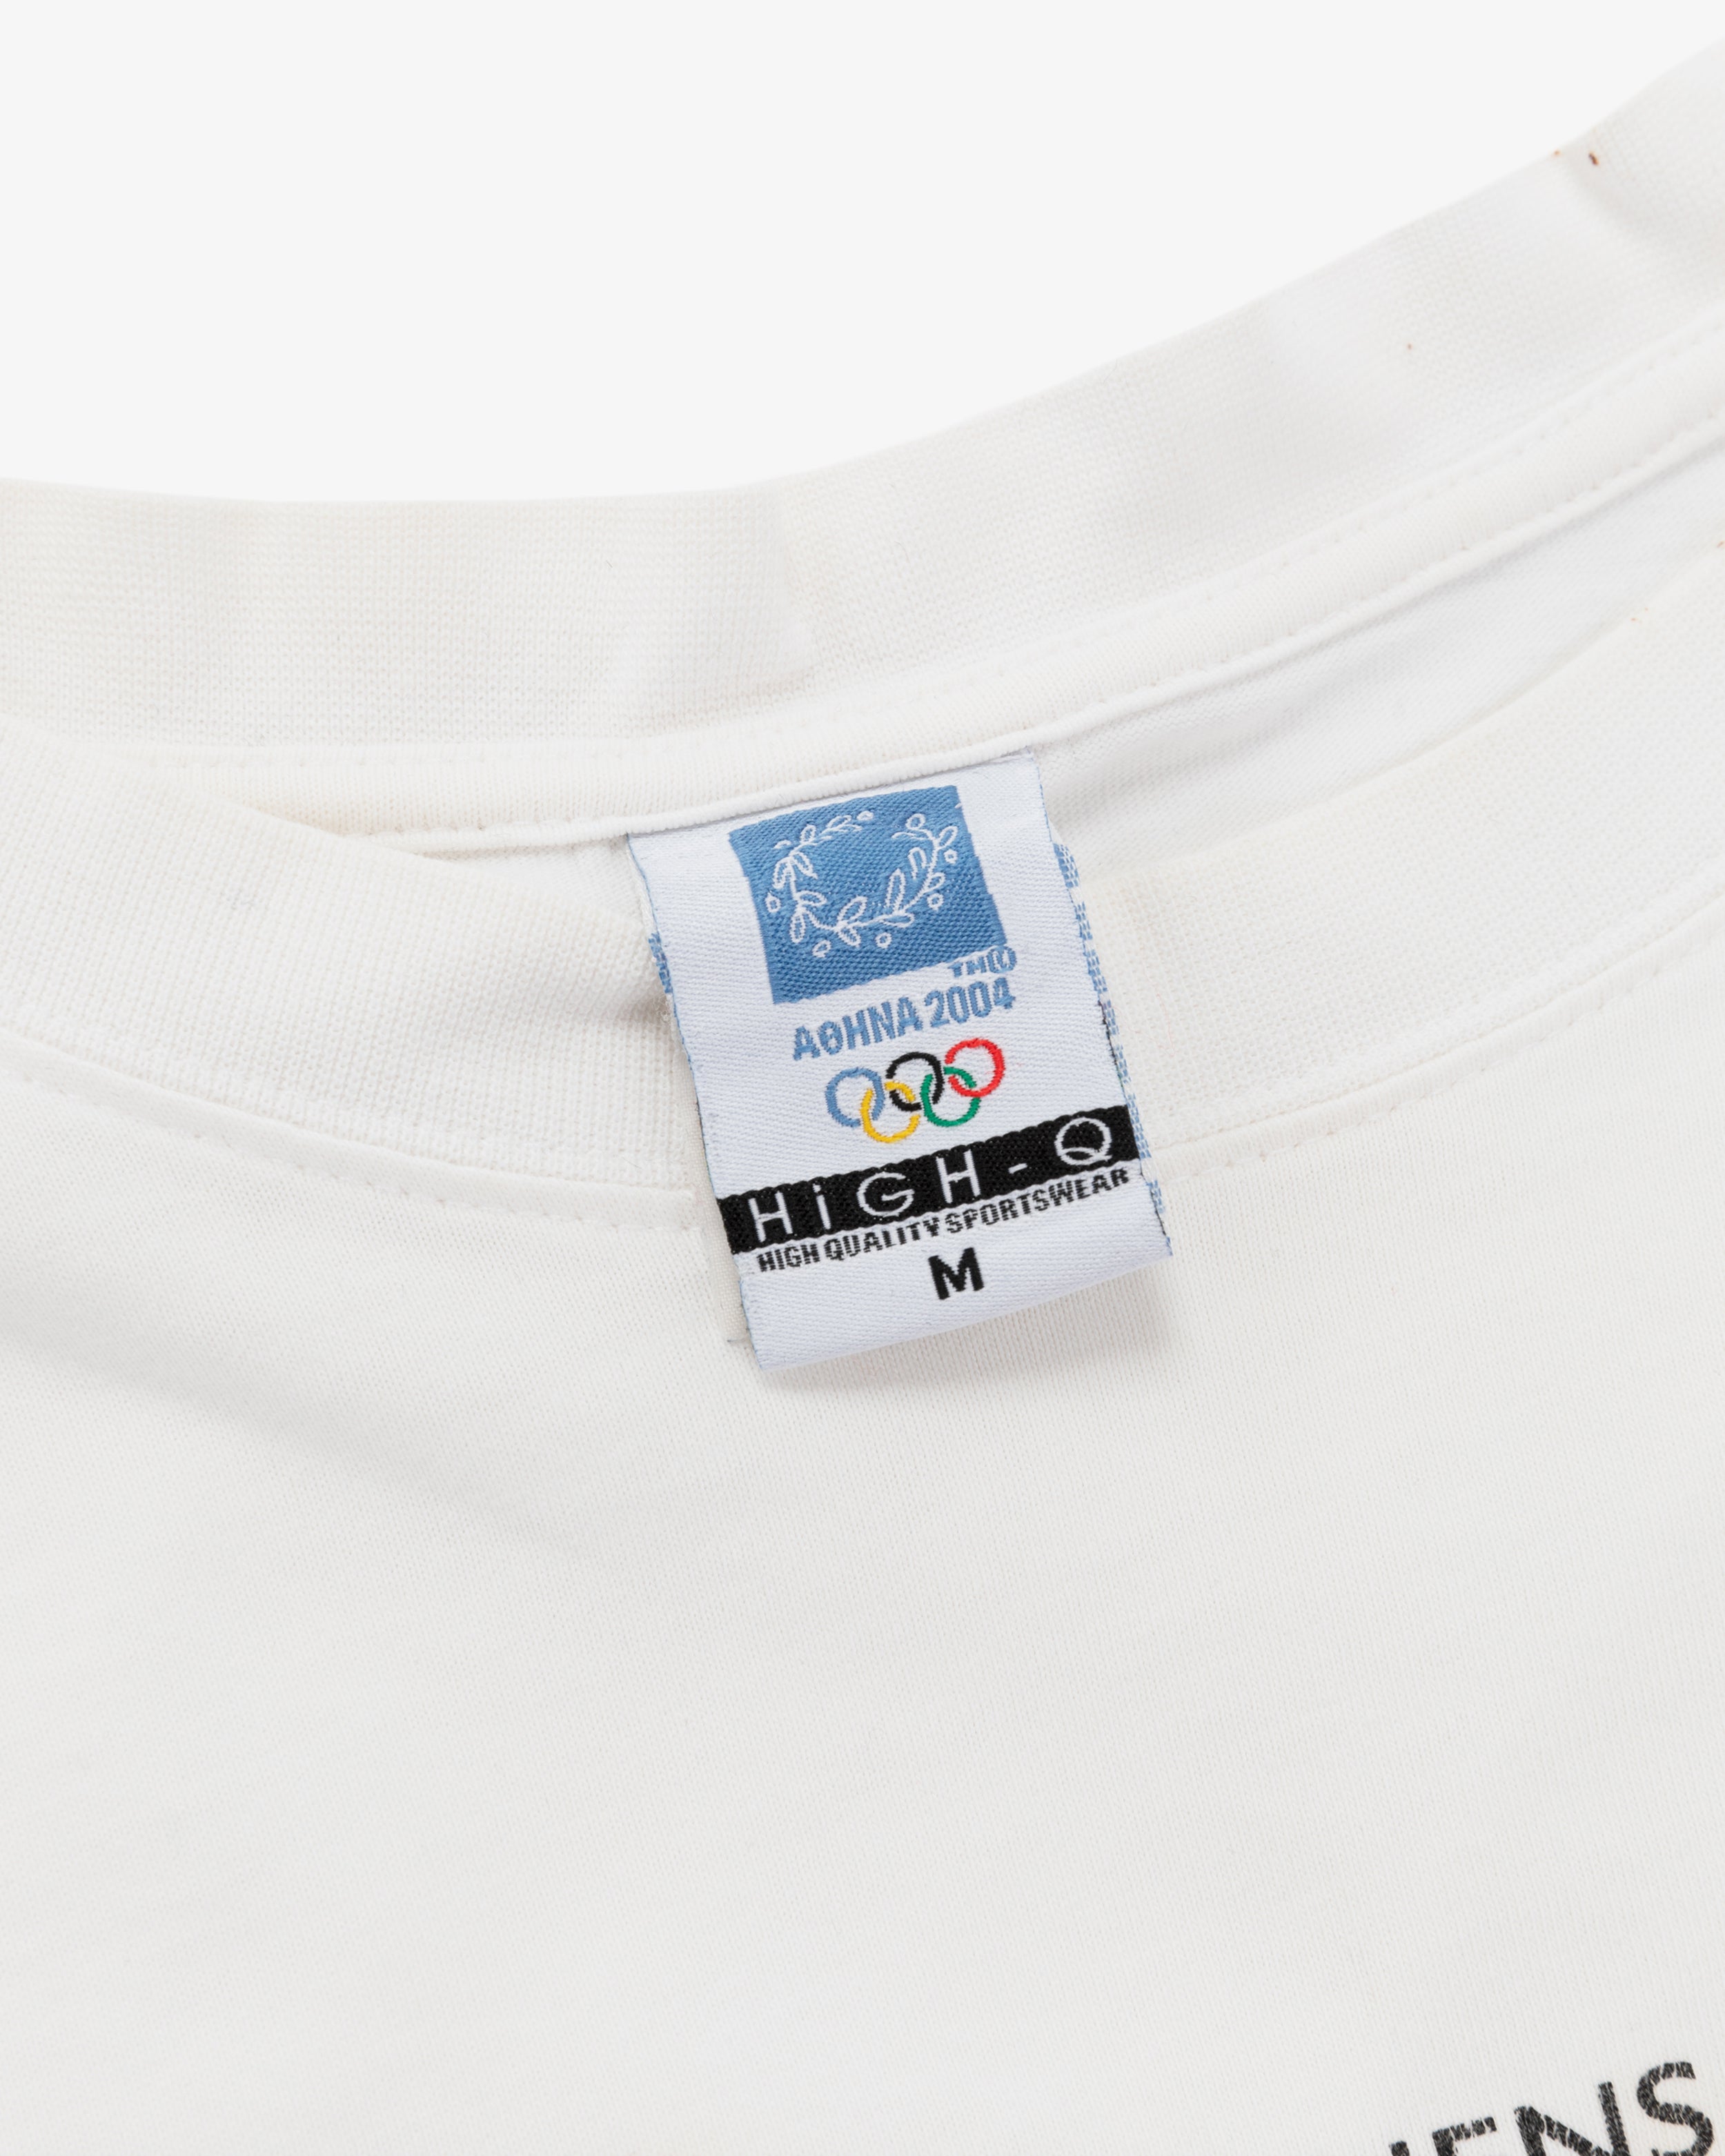 2004 Olympic Winter Games Pictogram Tee